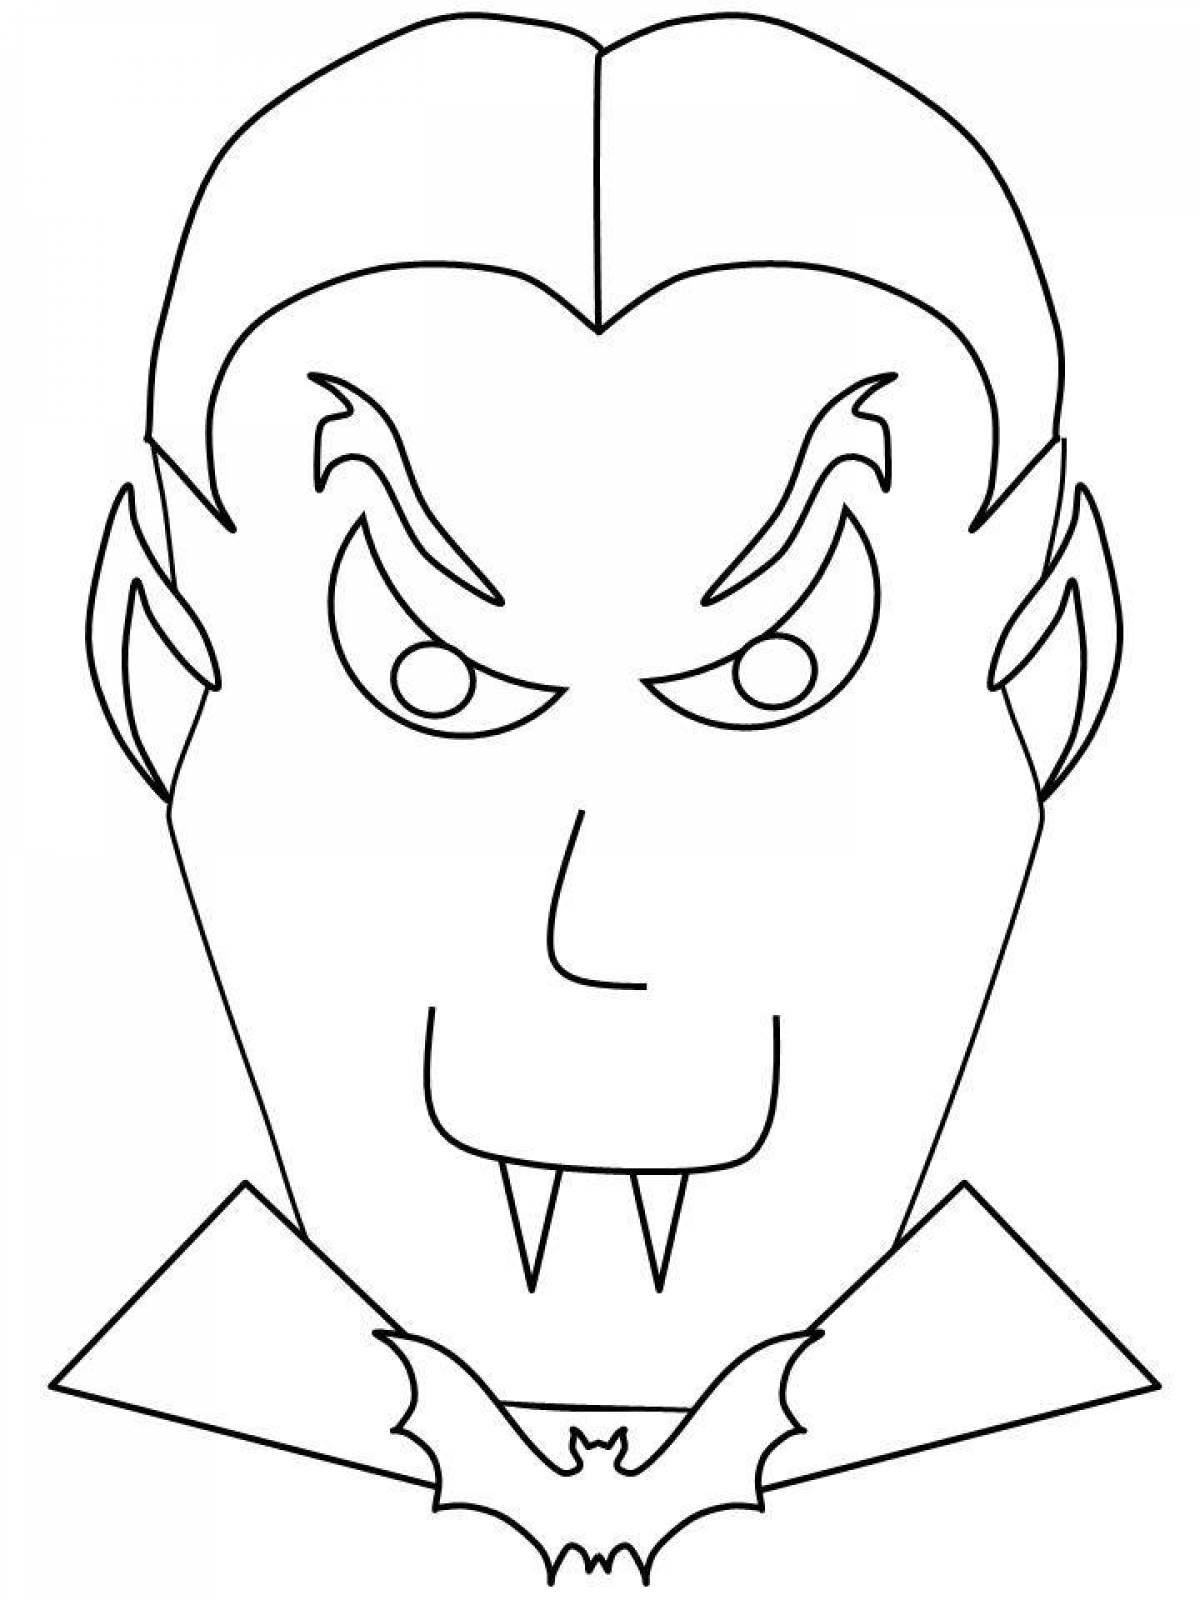 Vampire threat coloring page